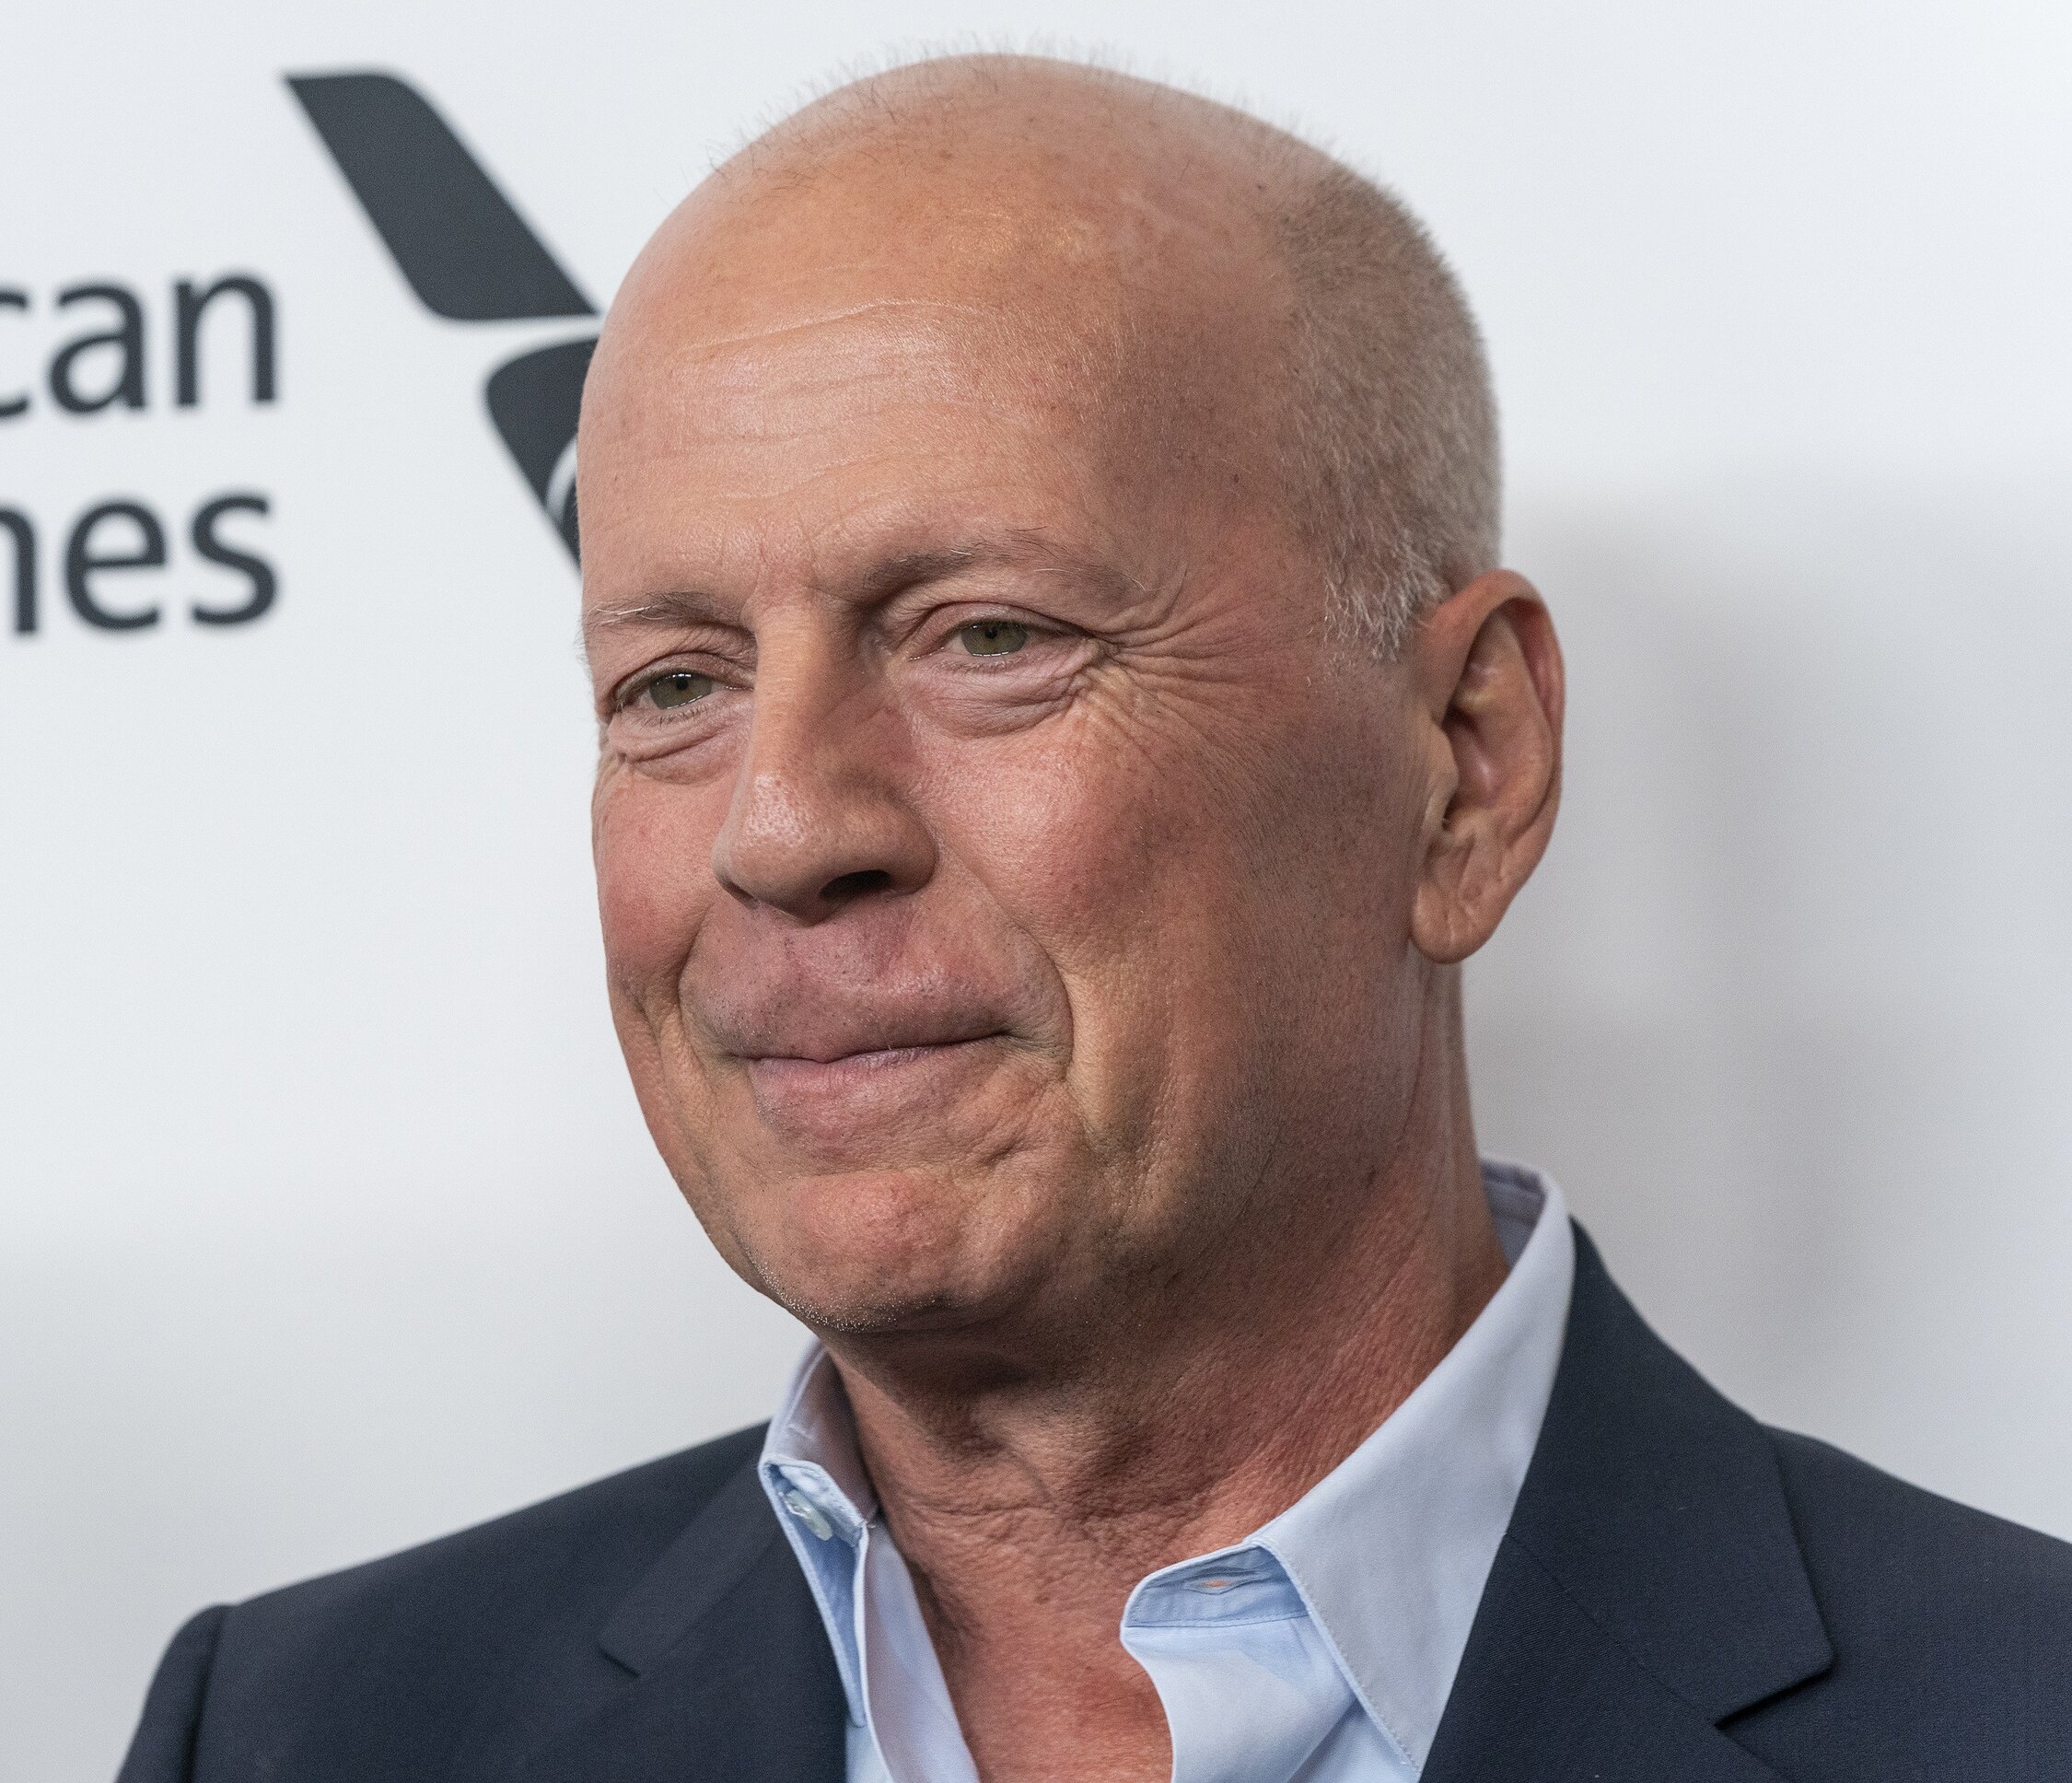 Reports said Bruce Willis sold his likeness to a deepfake company, but his Reps say he didn’t